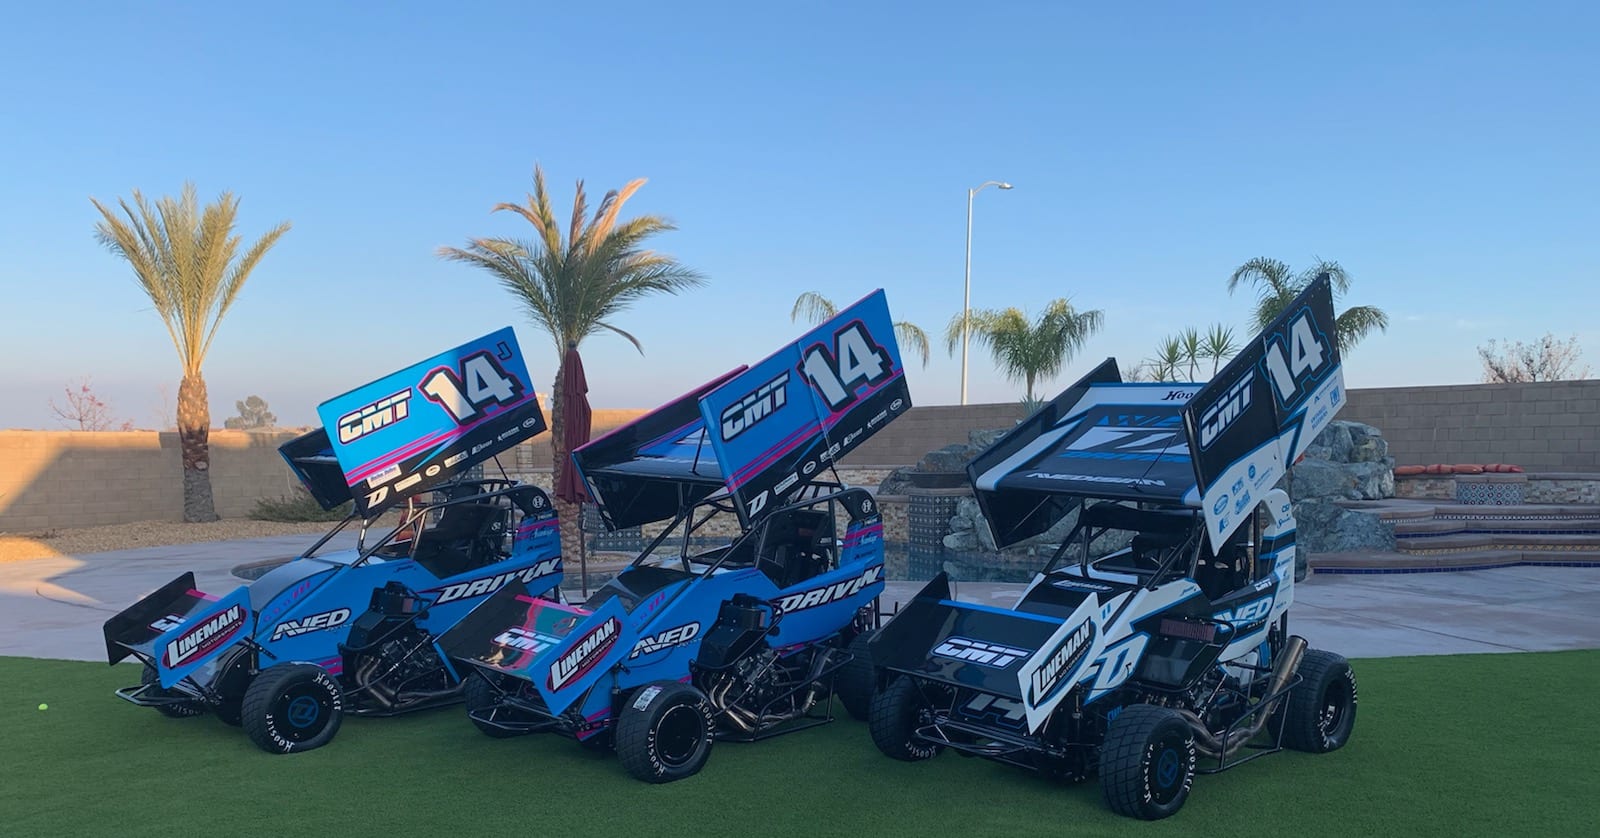 Jade Avedisian and Jake Hagopian will team up in search of victory during the Tulsa Shootout.